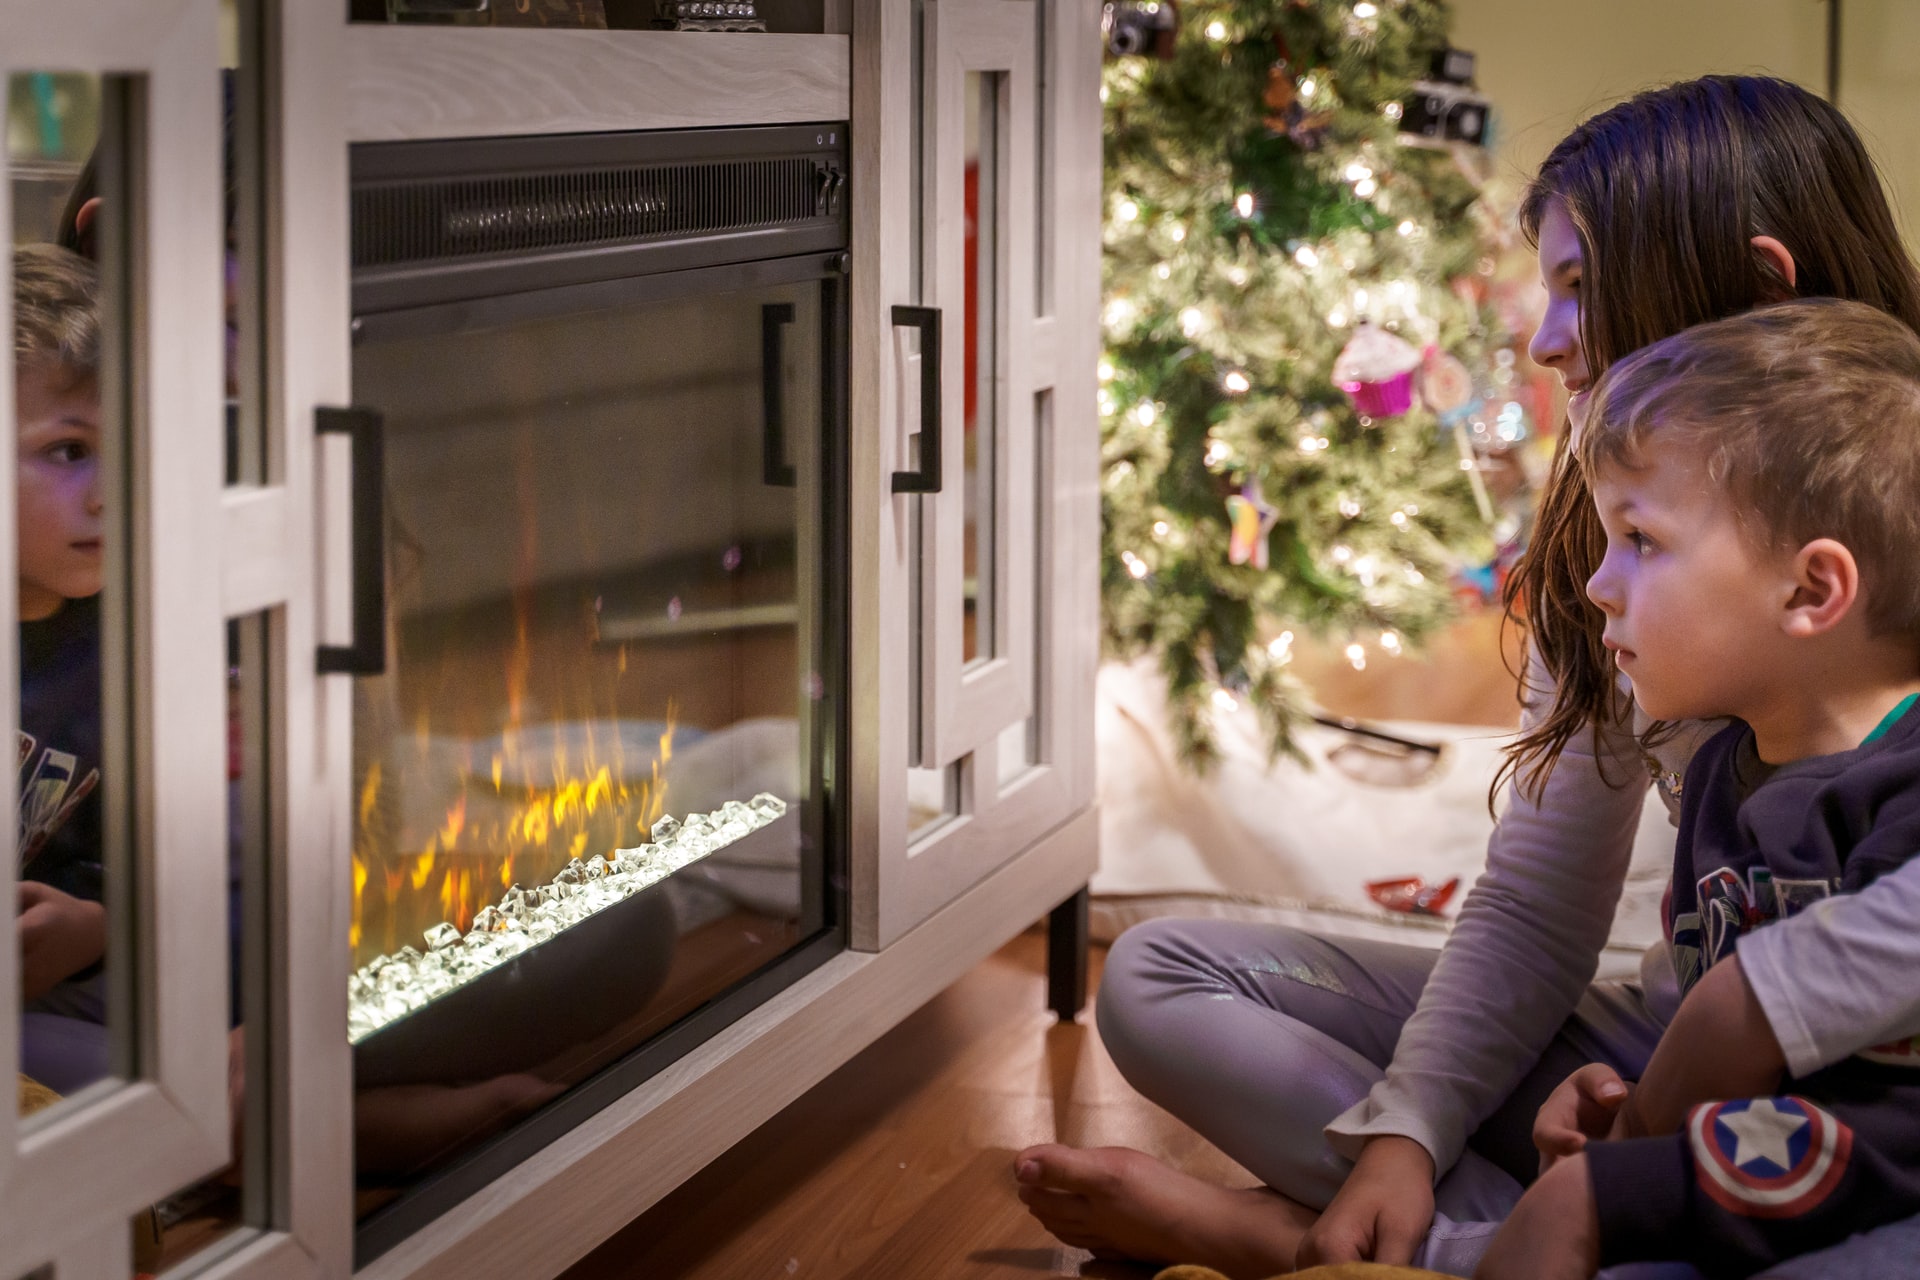 Bio-fireplace for built-in – what should you know before installation?